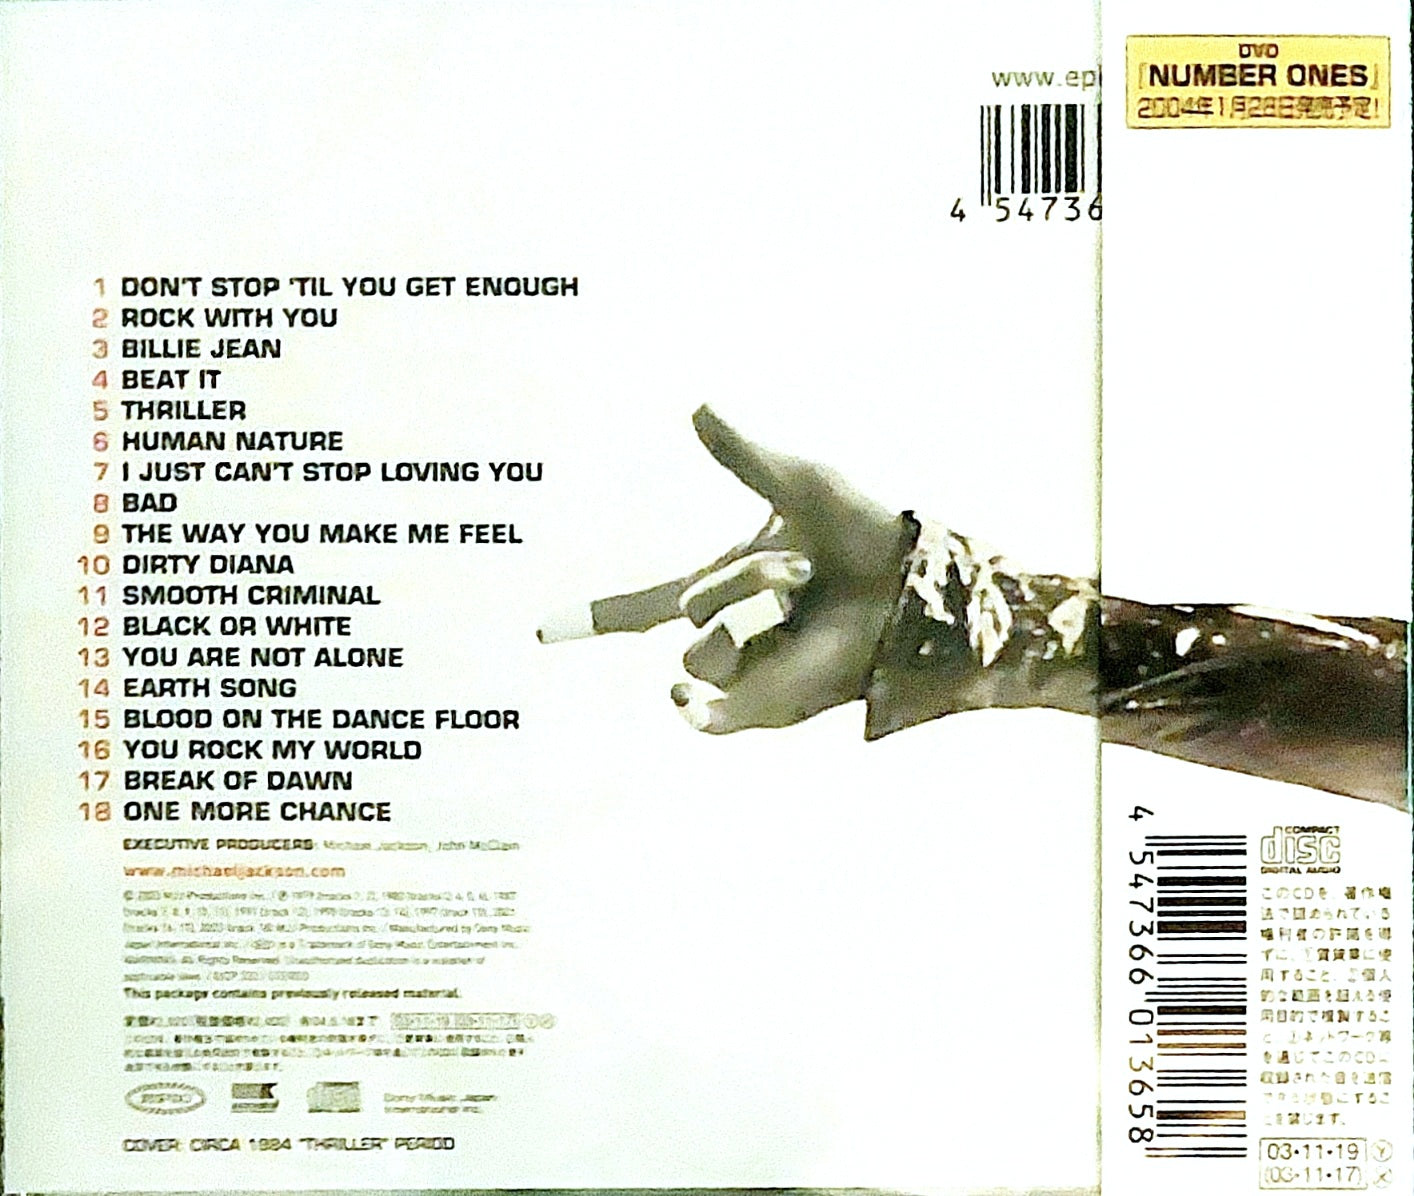 Michael Jackson: Number Ones - Japan CD in 'Thriller' Cover